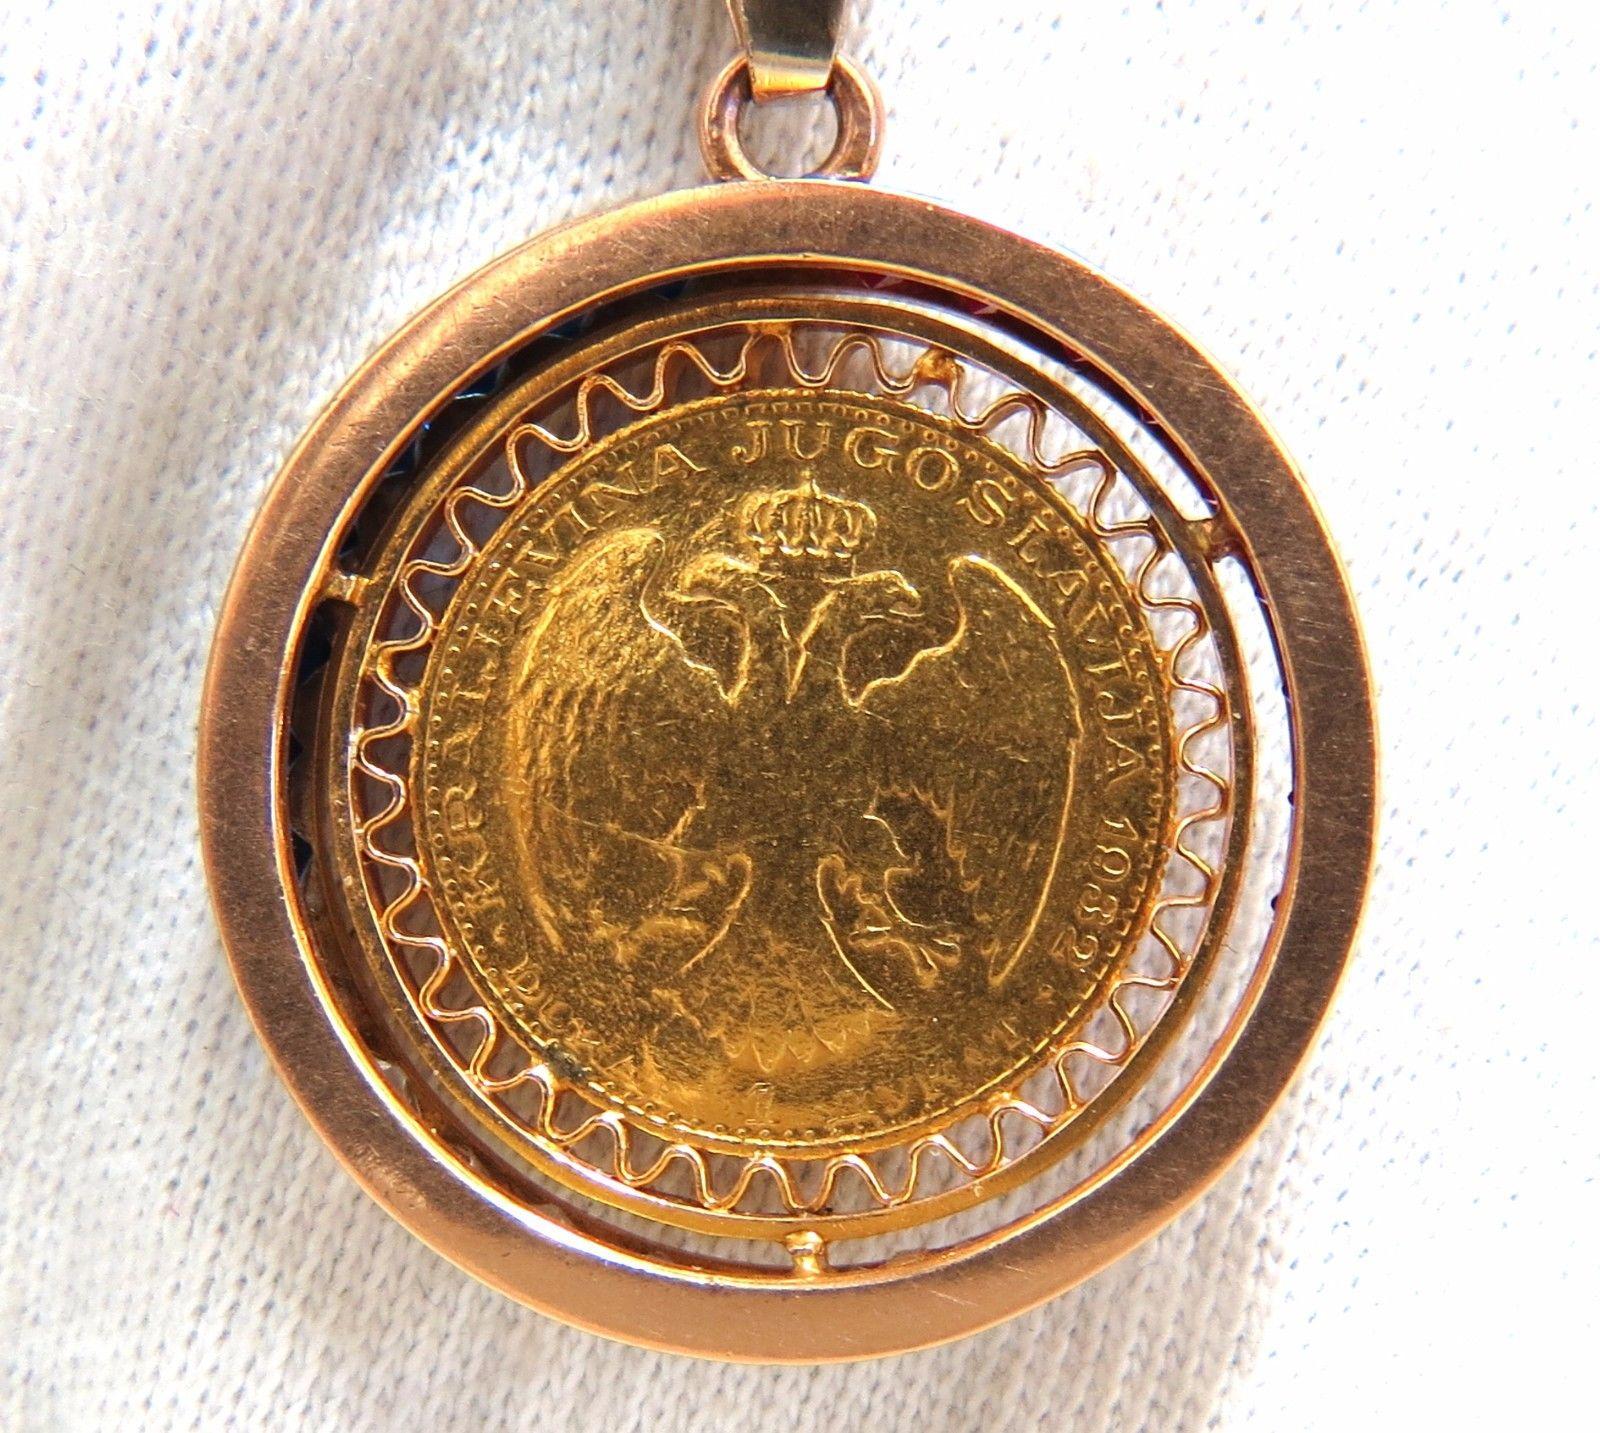 1 Ducat.

22kt Yugoslavia 1932 King Alexander Coin Pendant

18kt. Handmade Frame

Grand total weight: 
12.5 grams
Measures:

1.2 inch (total diameter)

1.8 inch ( total length)

All Stones on side test Synthetic.